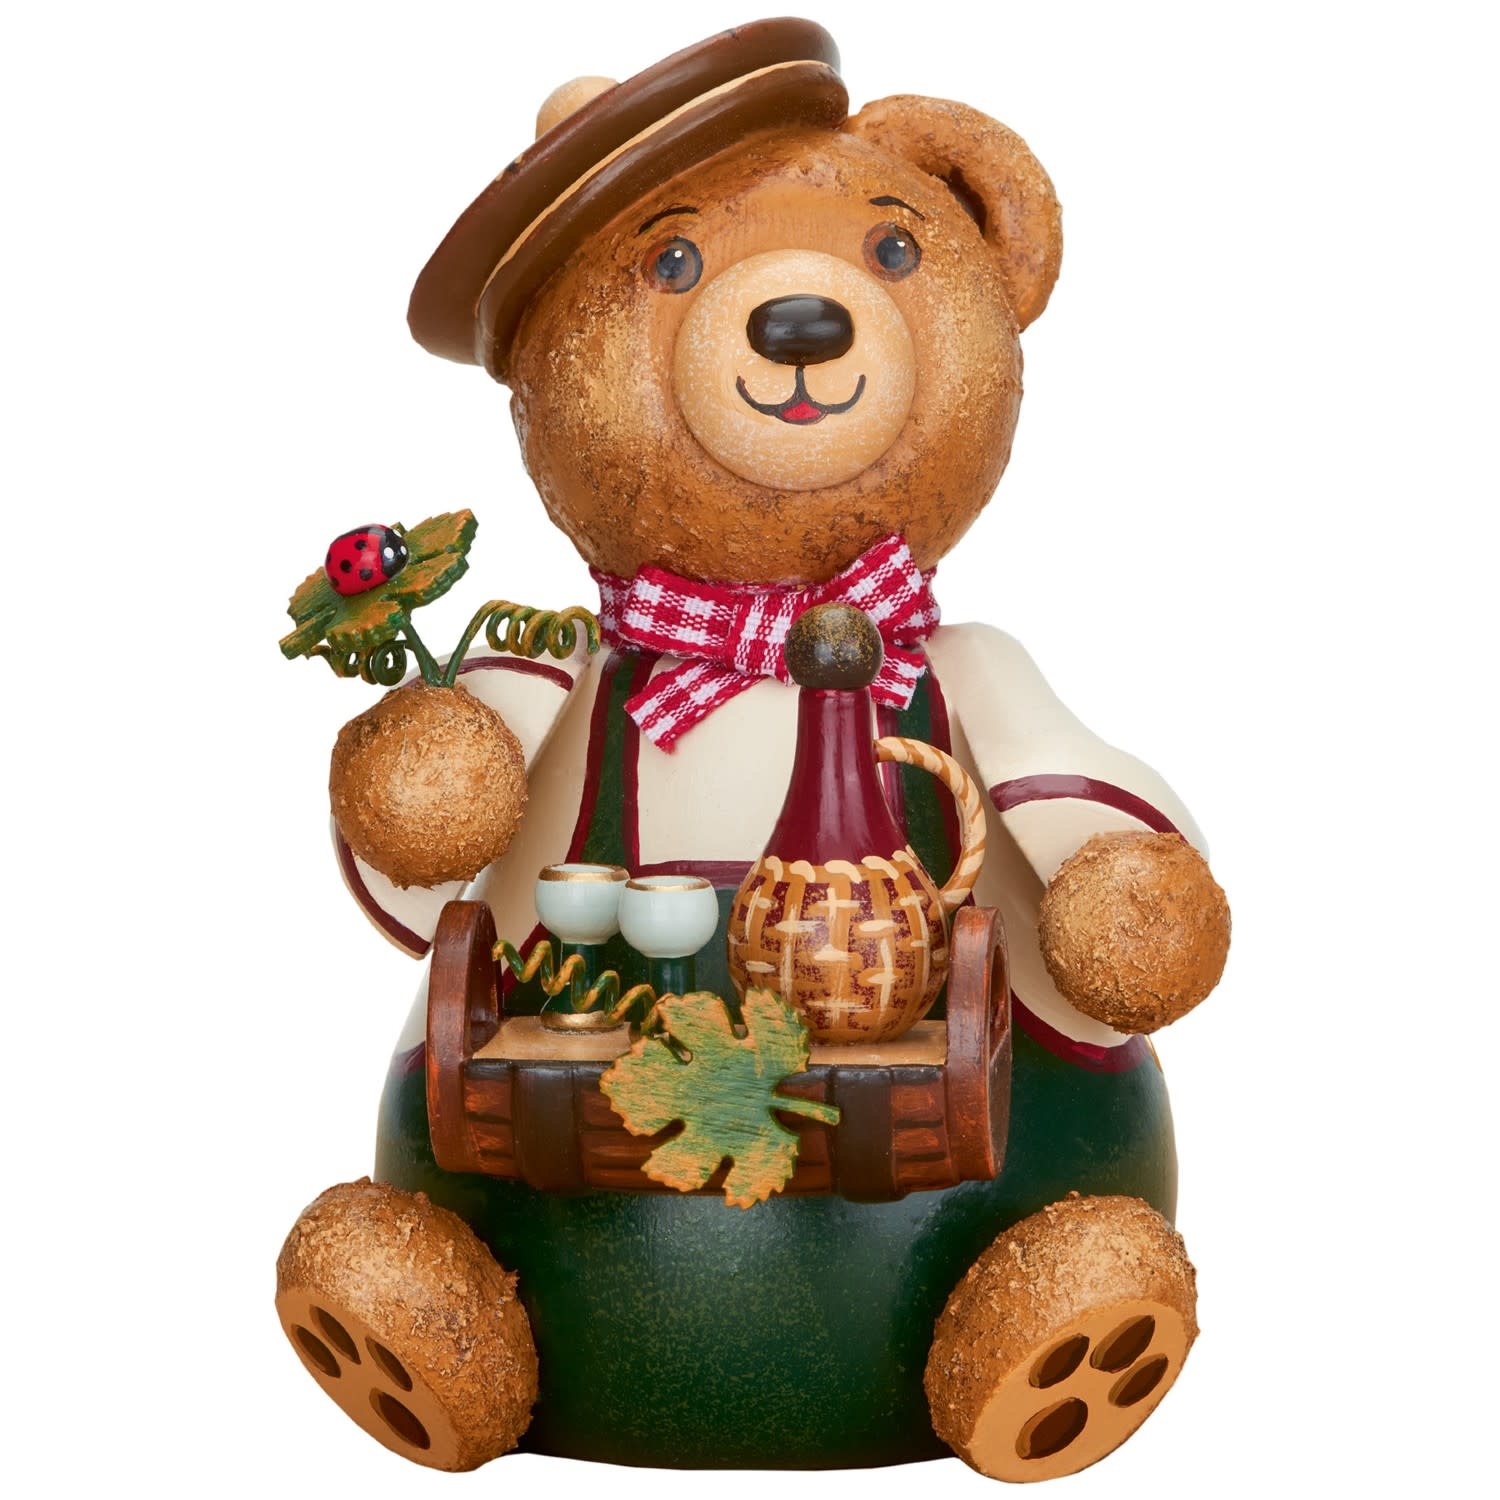 Hubrig 500h2001 Teddy - Wine Lover  4.7 inches